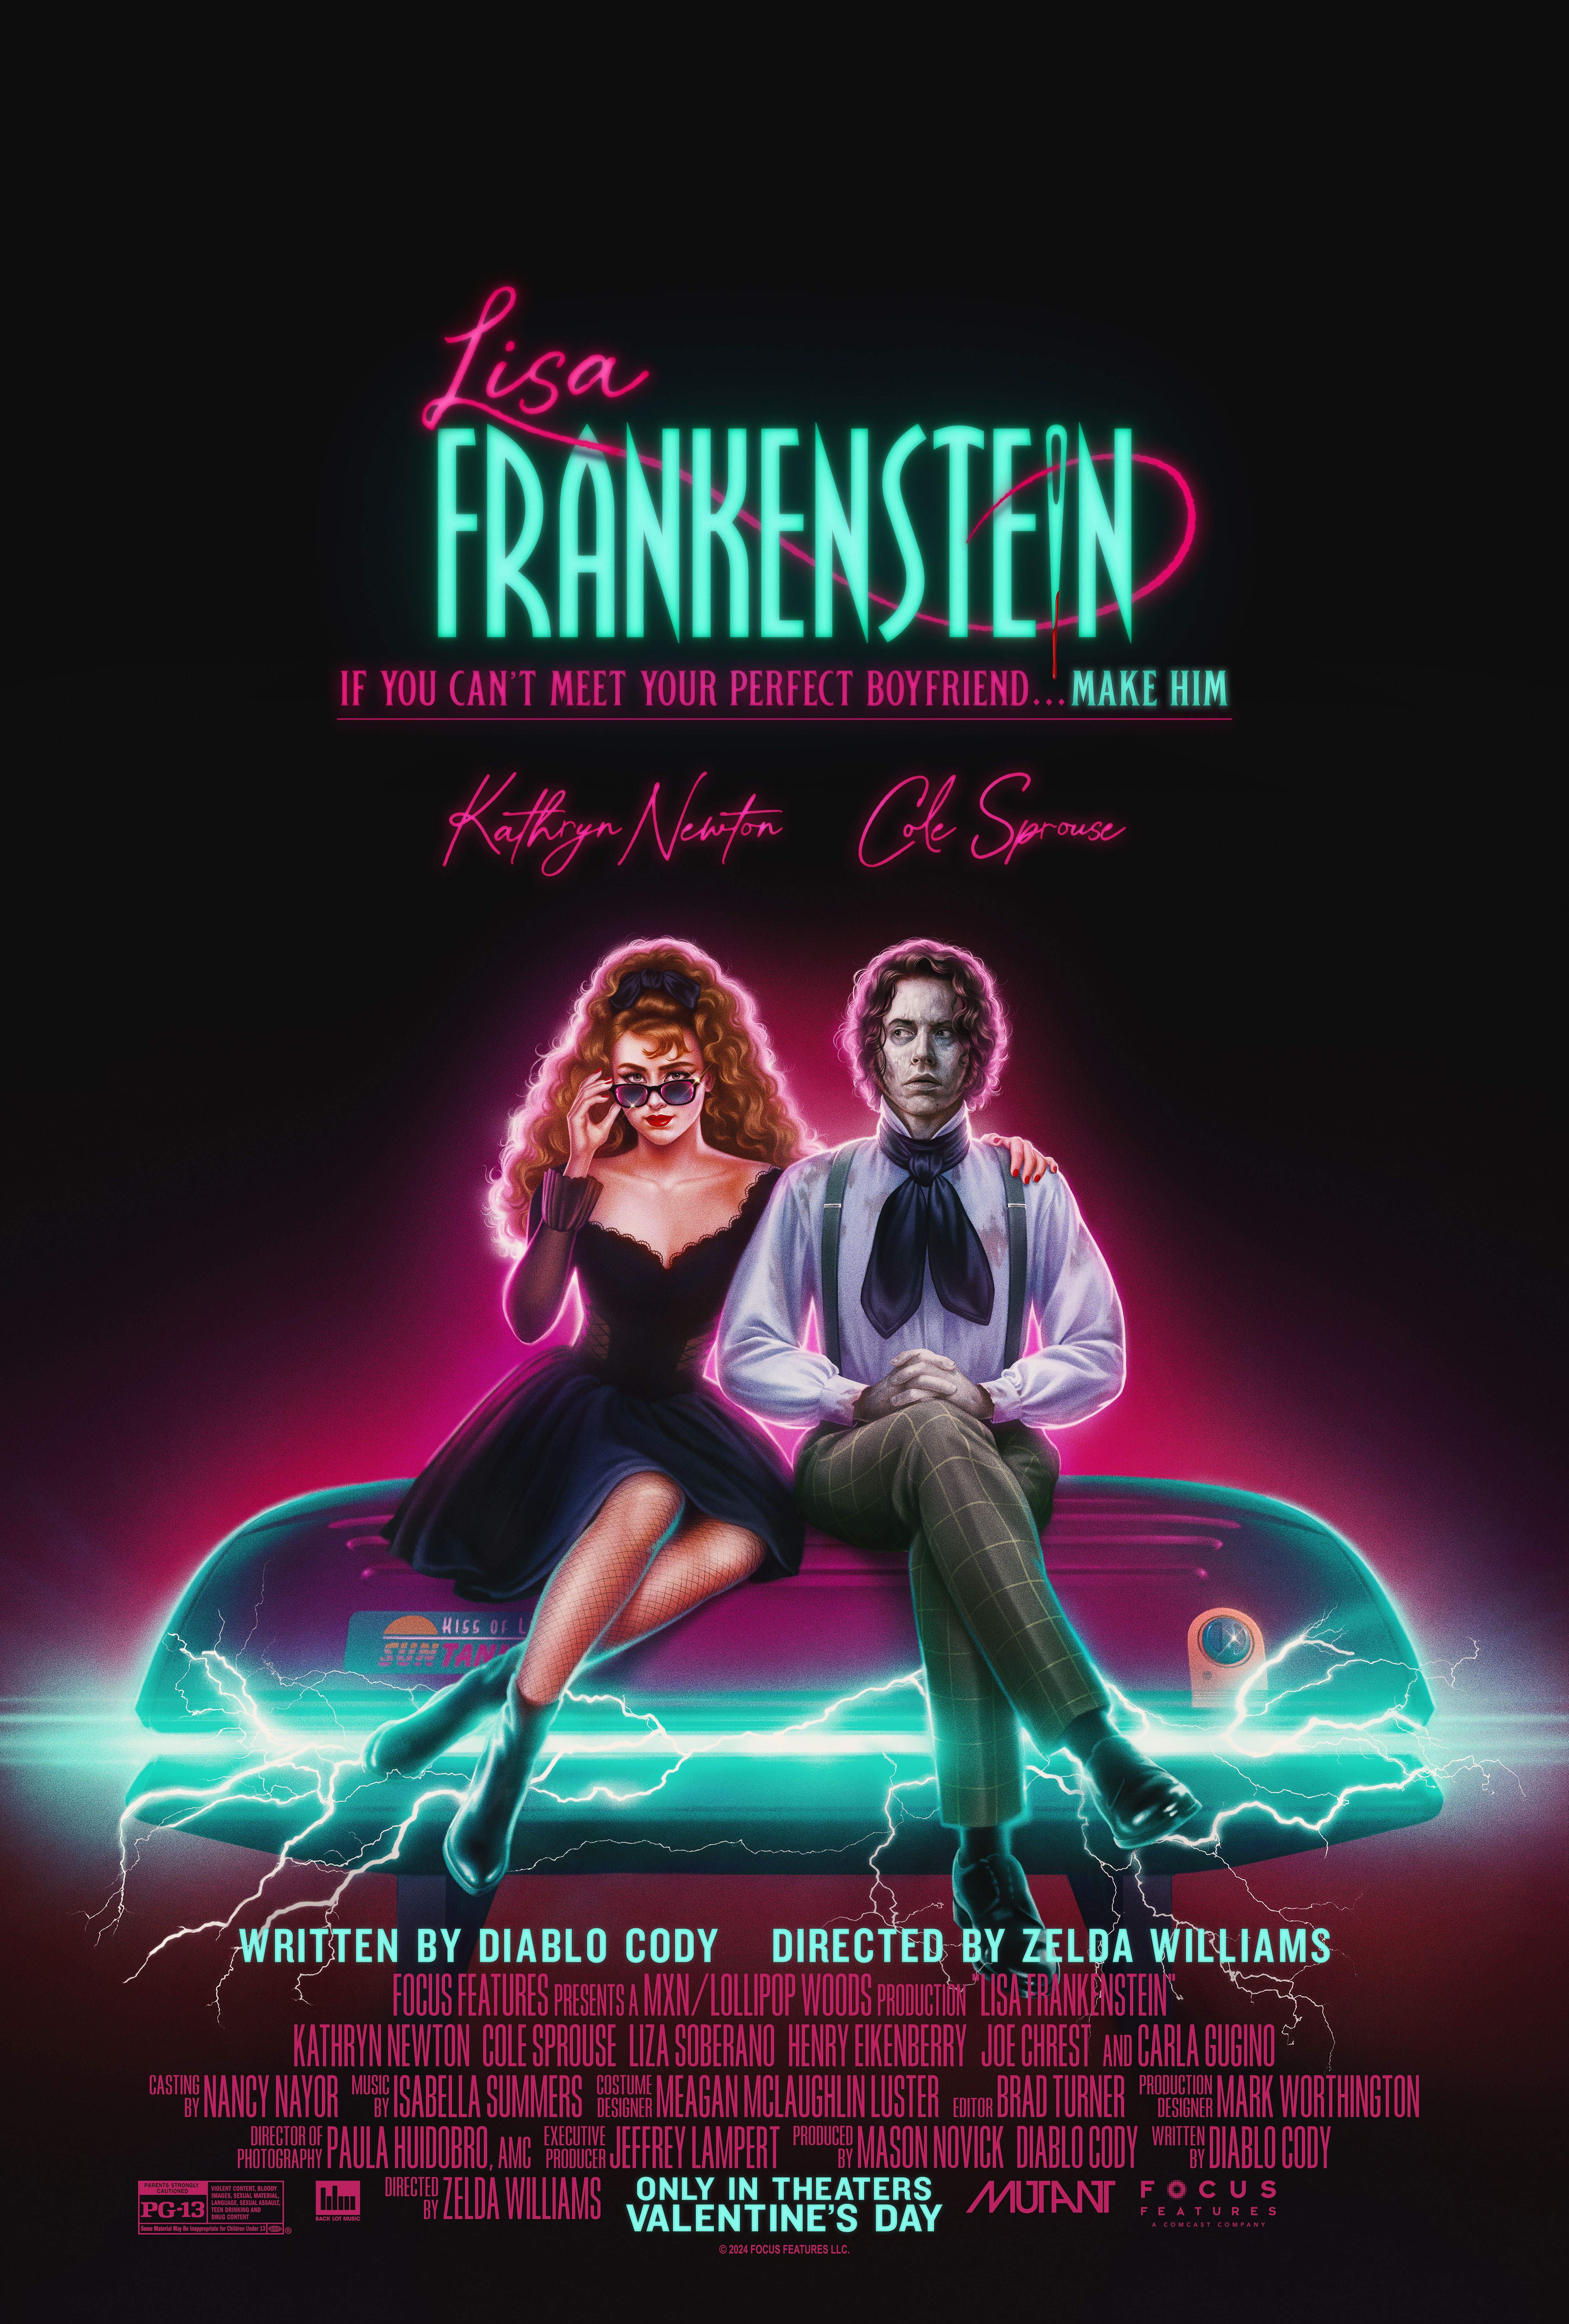 Lisa Frankenstein Poster With Kathryn Newton and Cole Sprouse Sitting Atop an Electrified Tanning Bed